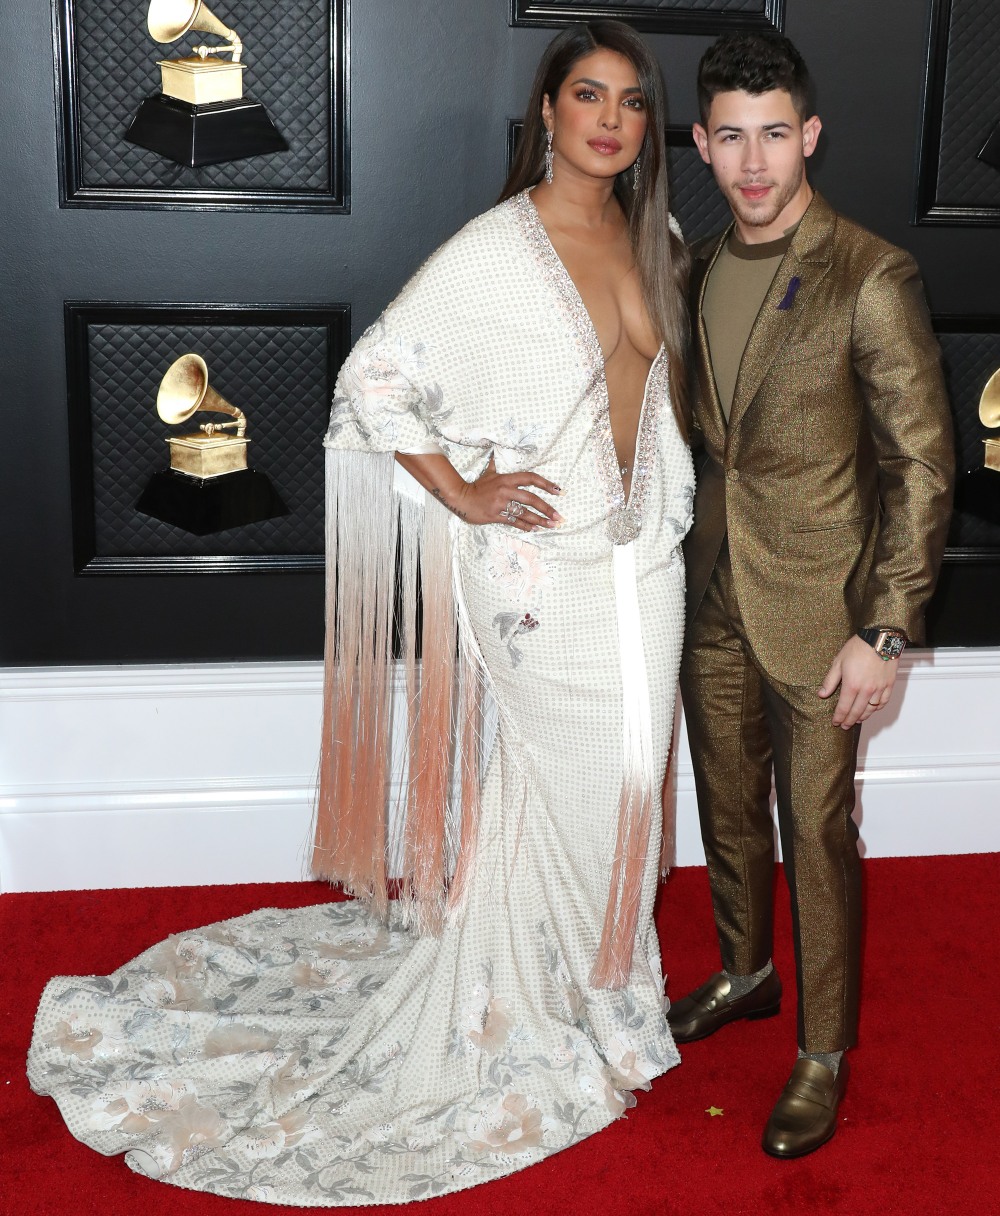 Priyanka Chopra and Nick Jonas arrive at the 62nd Annual GRAMMY Awards held at Staples Center on January 26, 2020 in Los Angeles, California, United States.